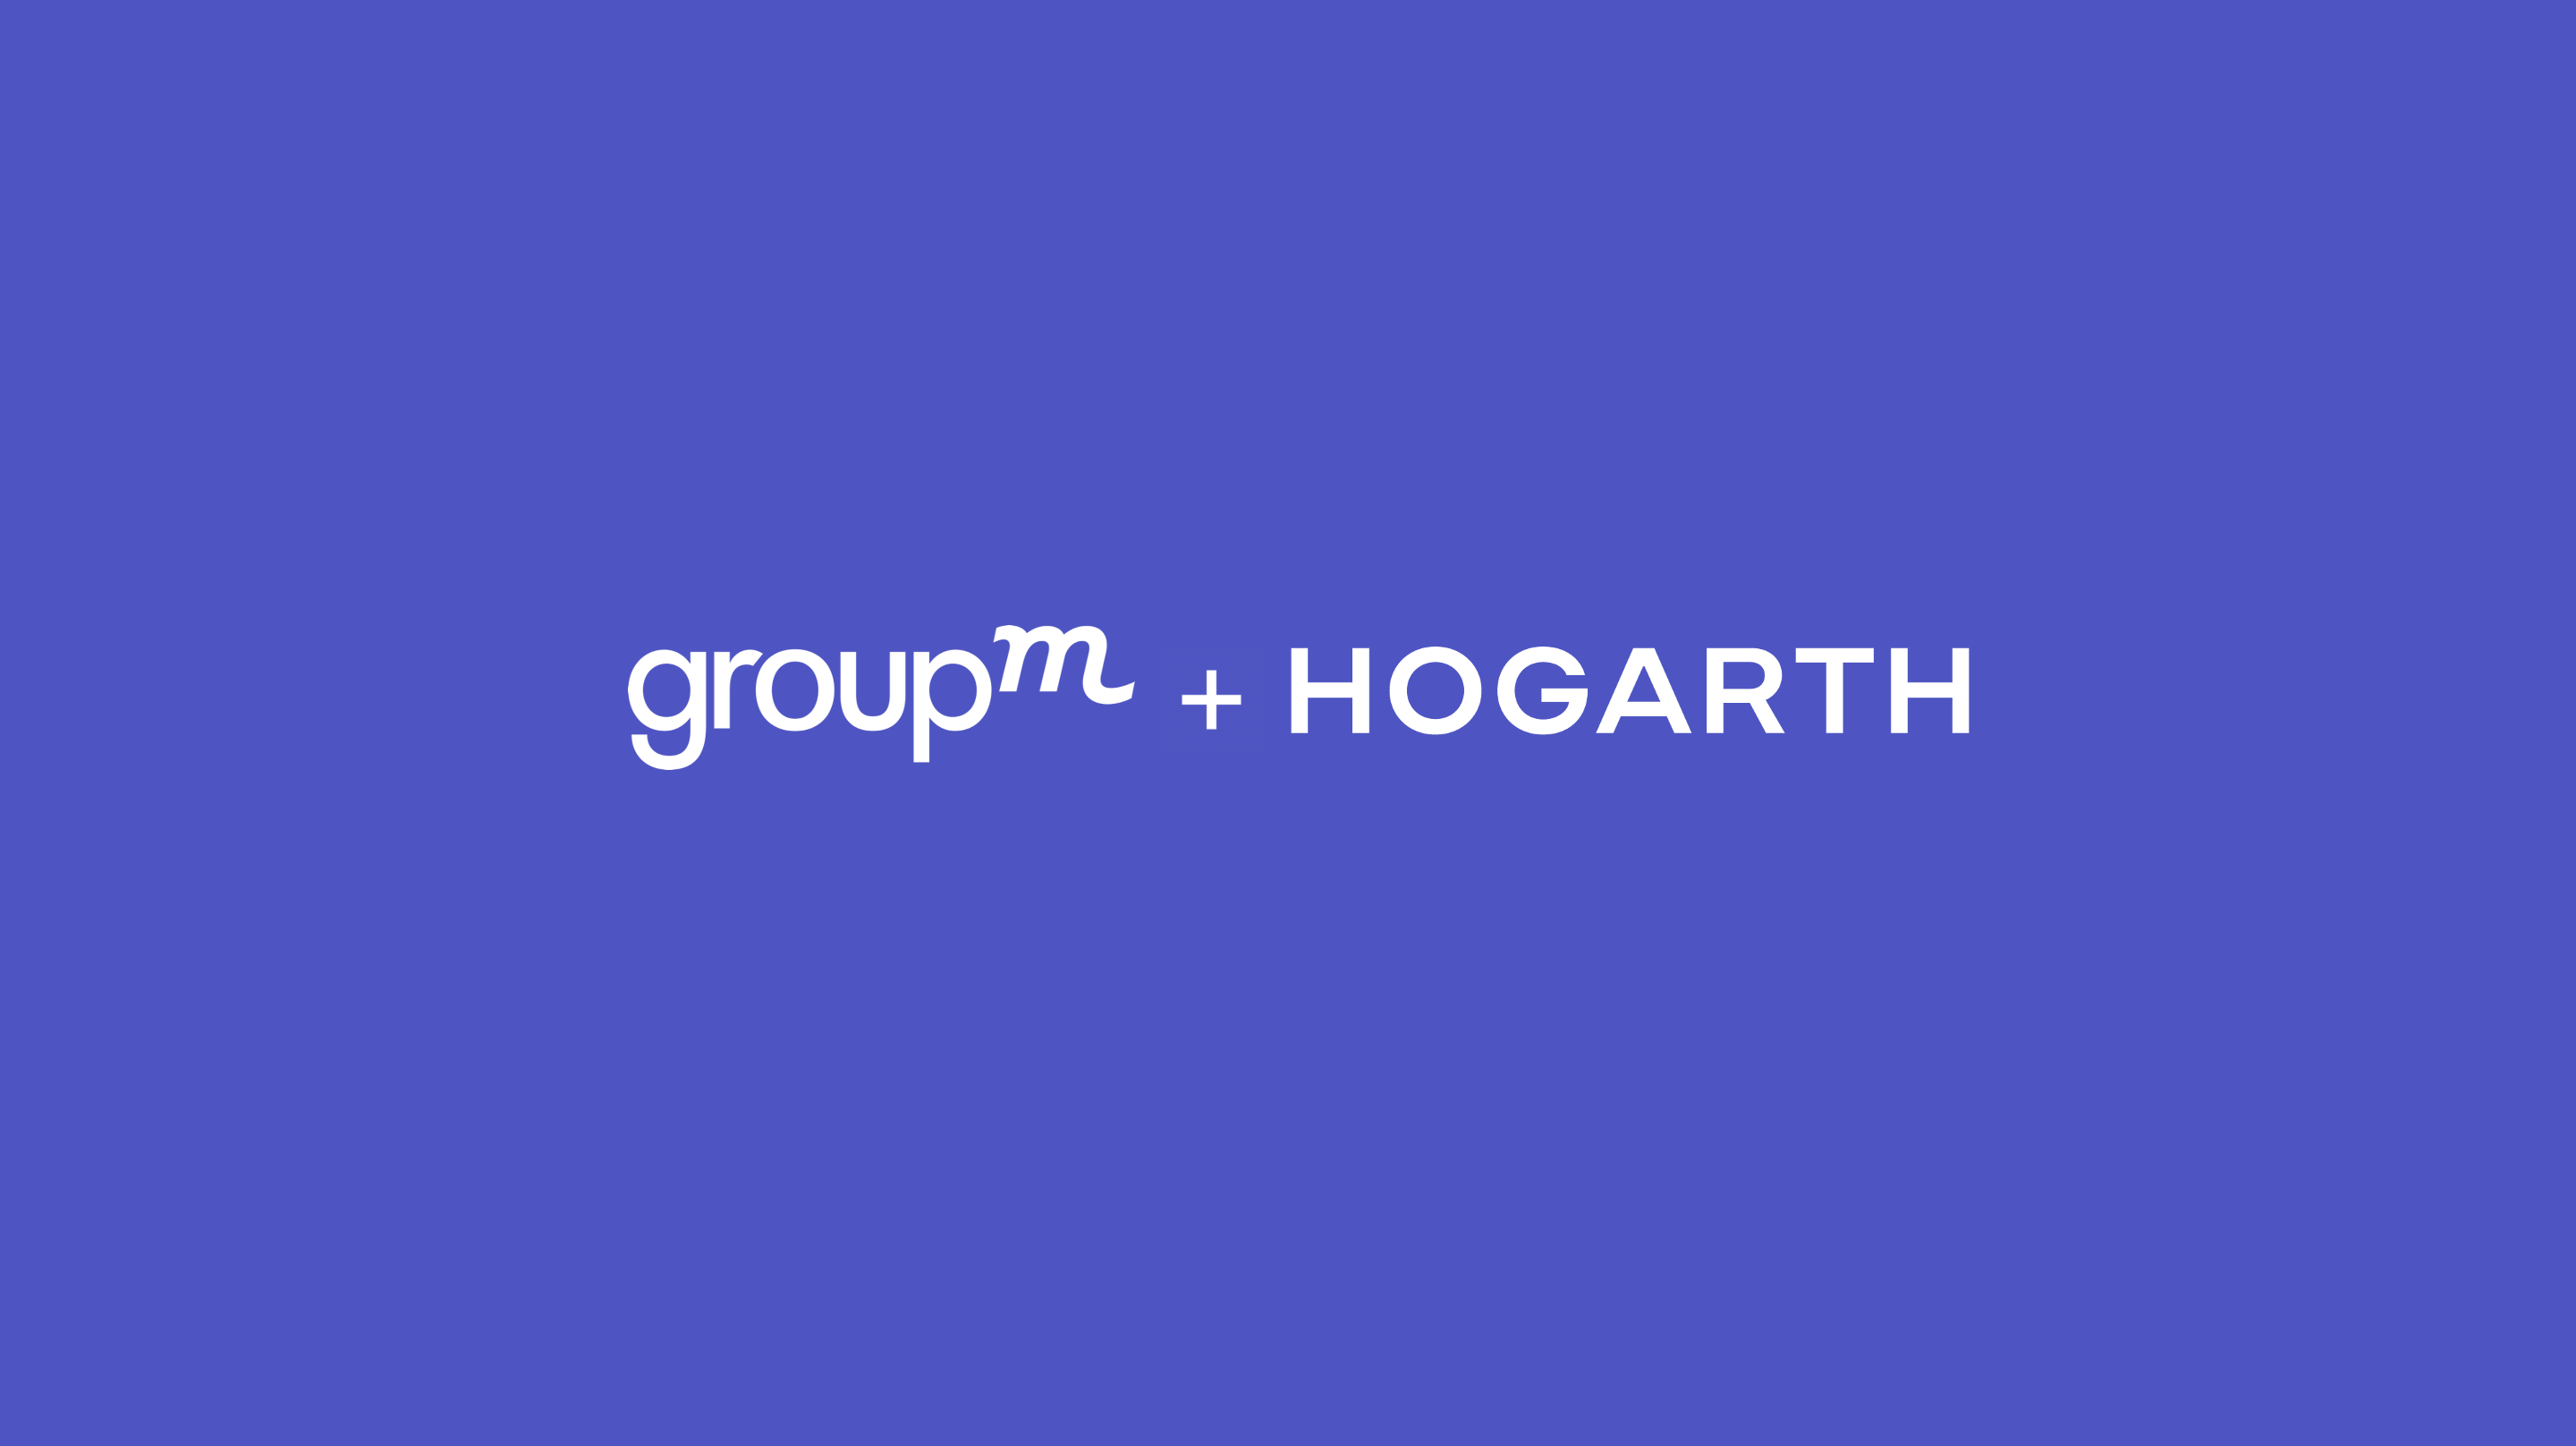 GroupM partners with Hogarth Worldwide to launch a Global Addressable Content Practice